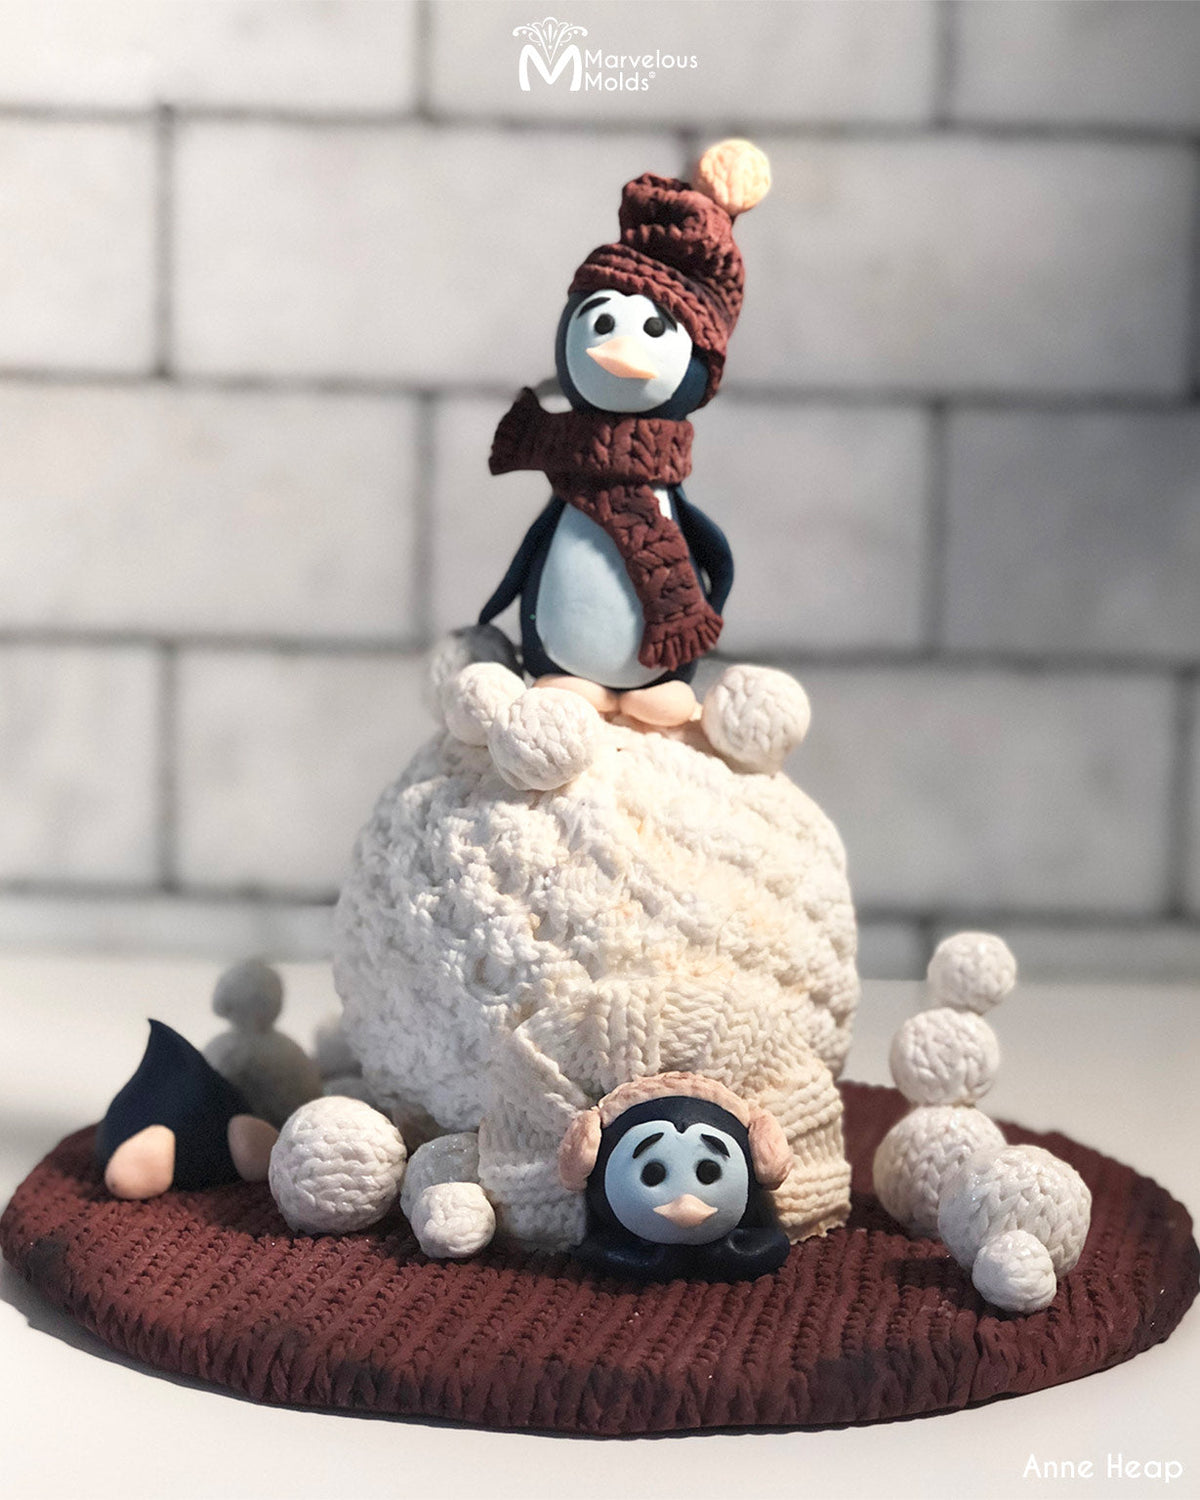 Penguin Knit Winter Cake Decorated with Marvelous Molds Medium Knit Buttons Silicone Mold